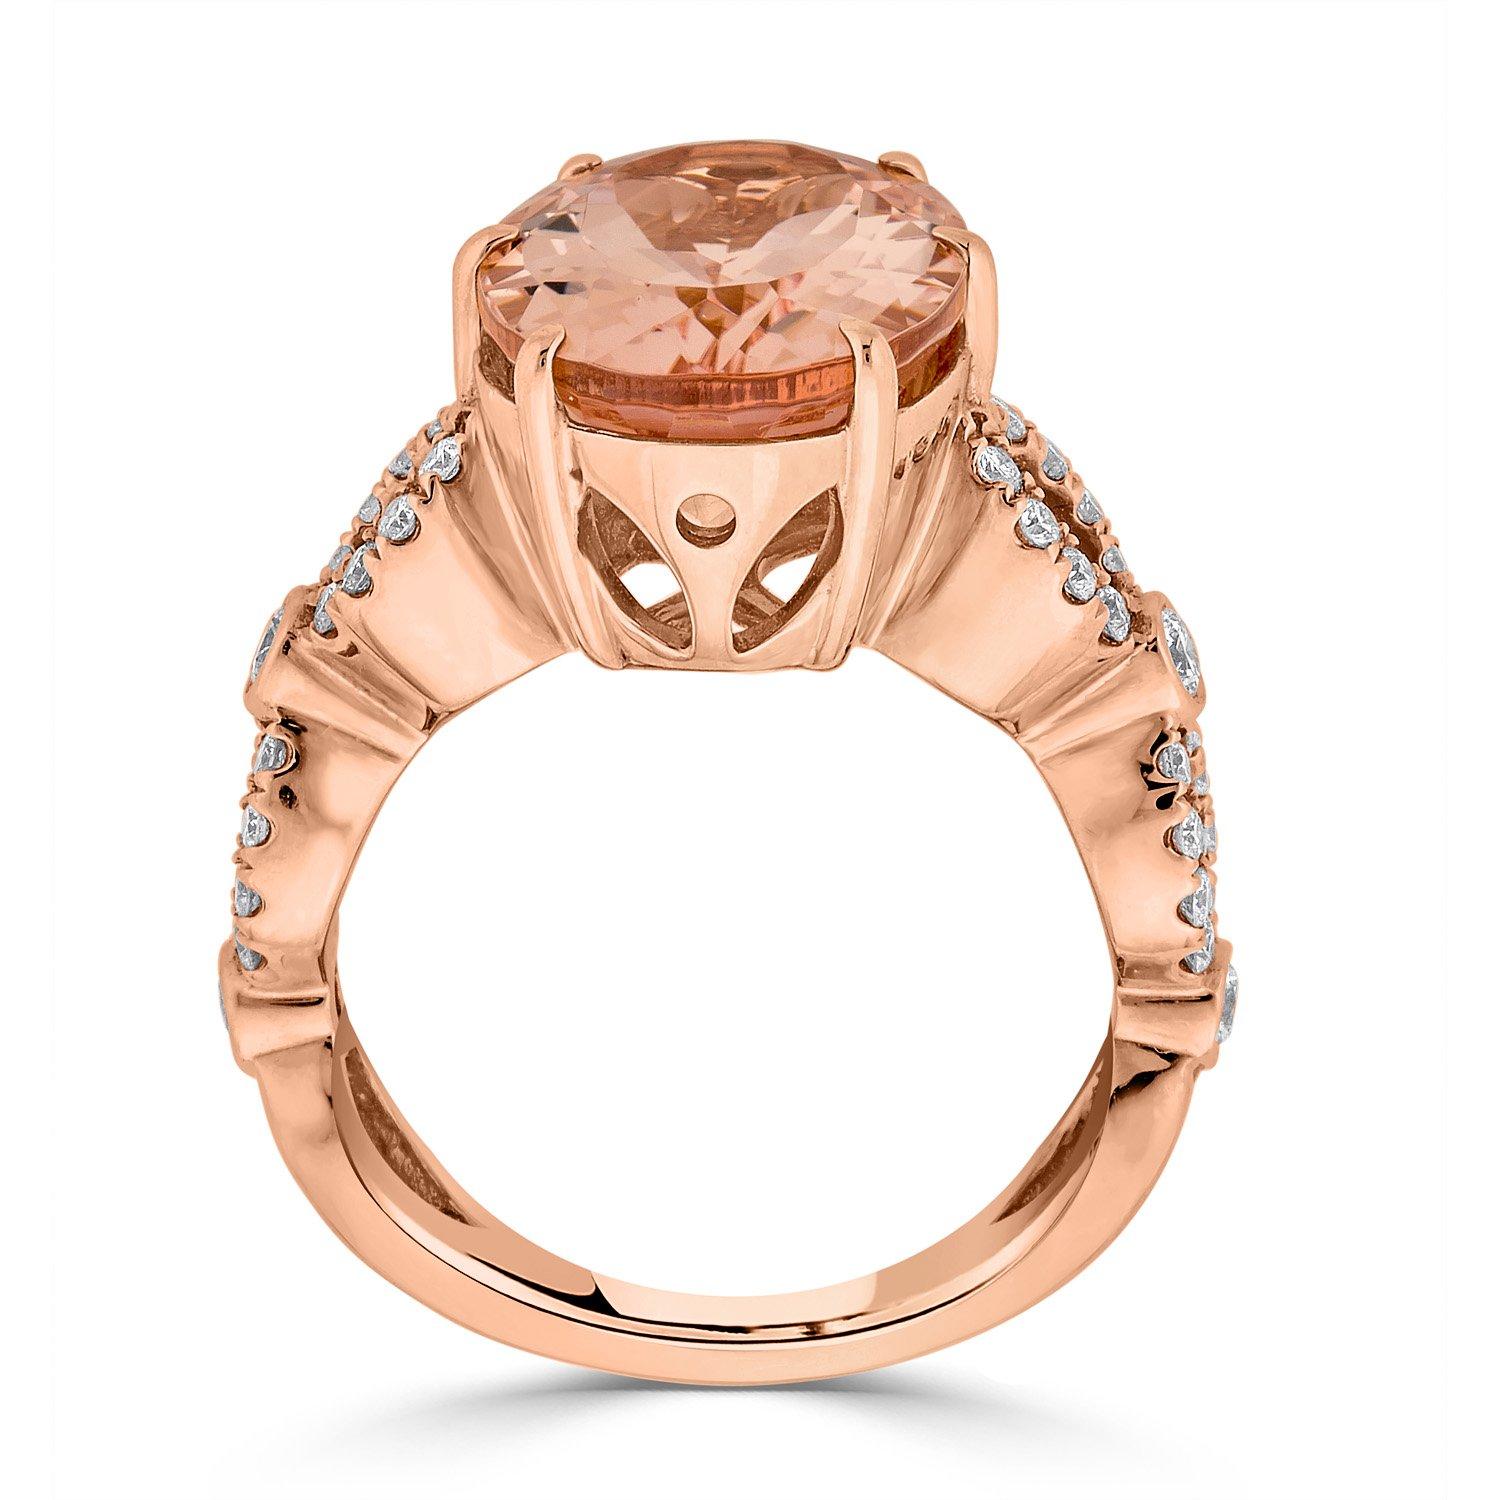 Oval Cut 7.77ct Morganite Ring with 0.50Tct Diamonds Set in 14K Rose Gold For Sale